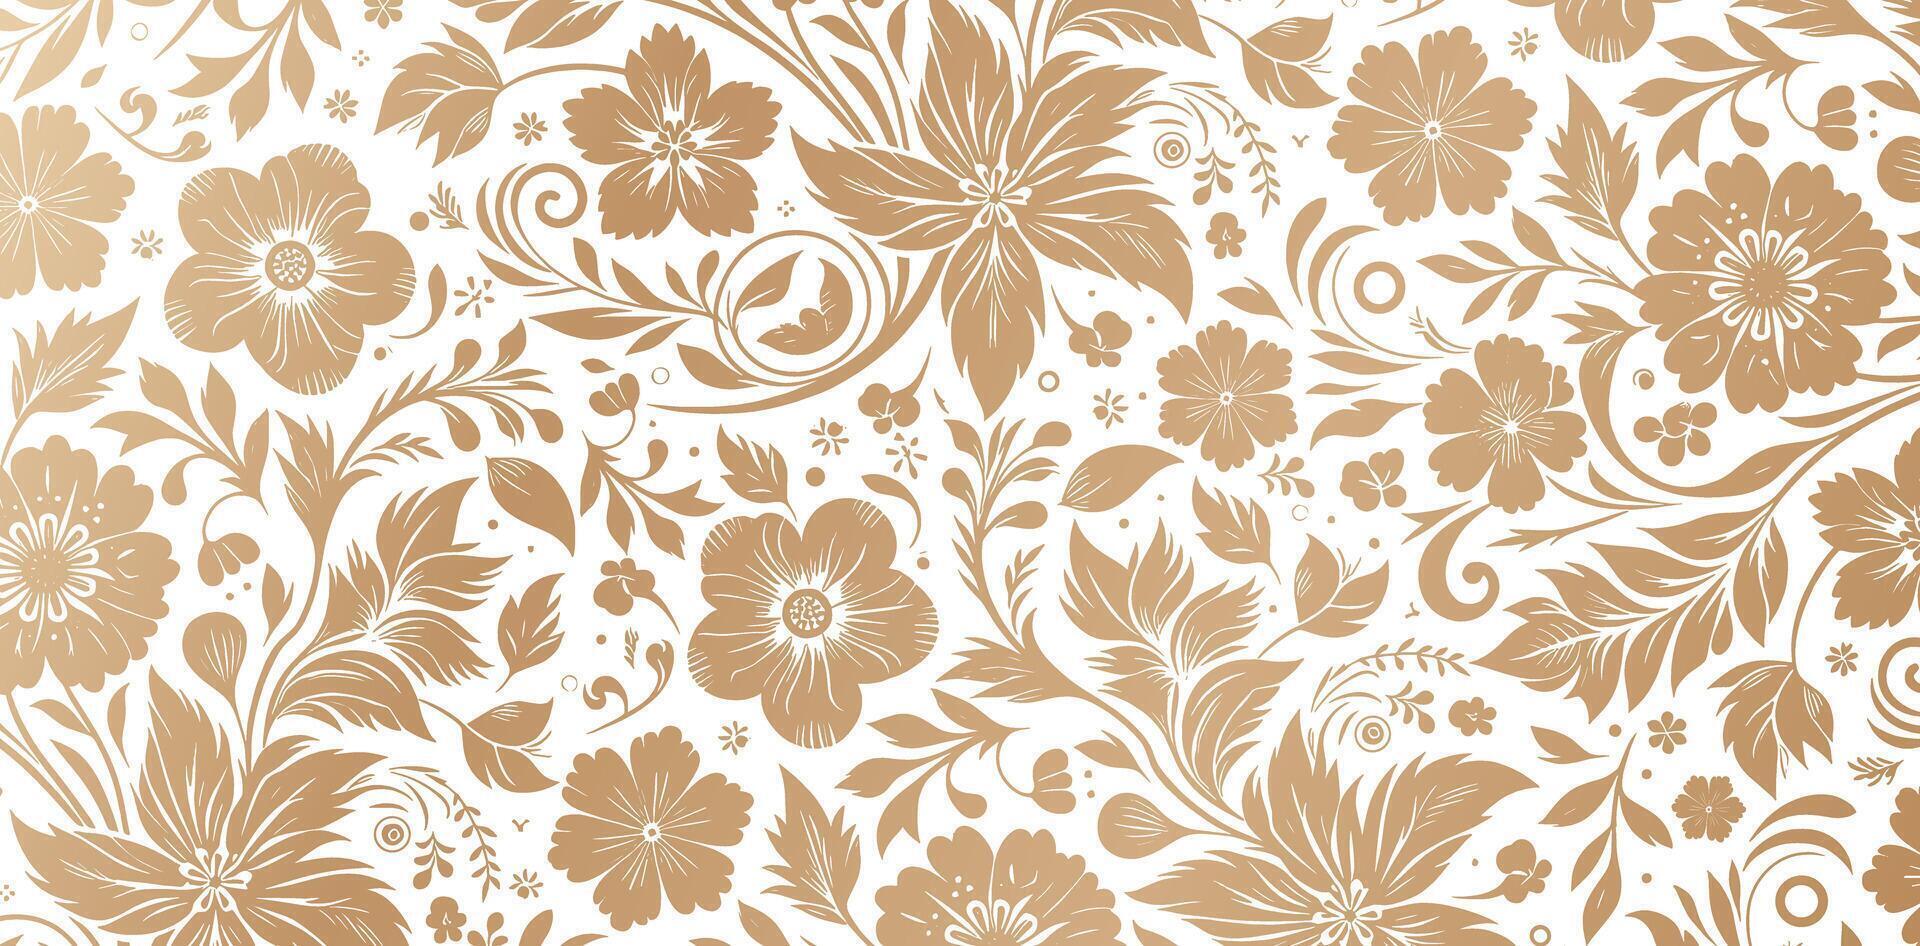 pattern with golden flowers and  floral leaves backgrounds isolated white colors for Fashionable modern wallpaper or textiles, book cover, Digital interfaces, print designs template materials vector